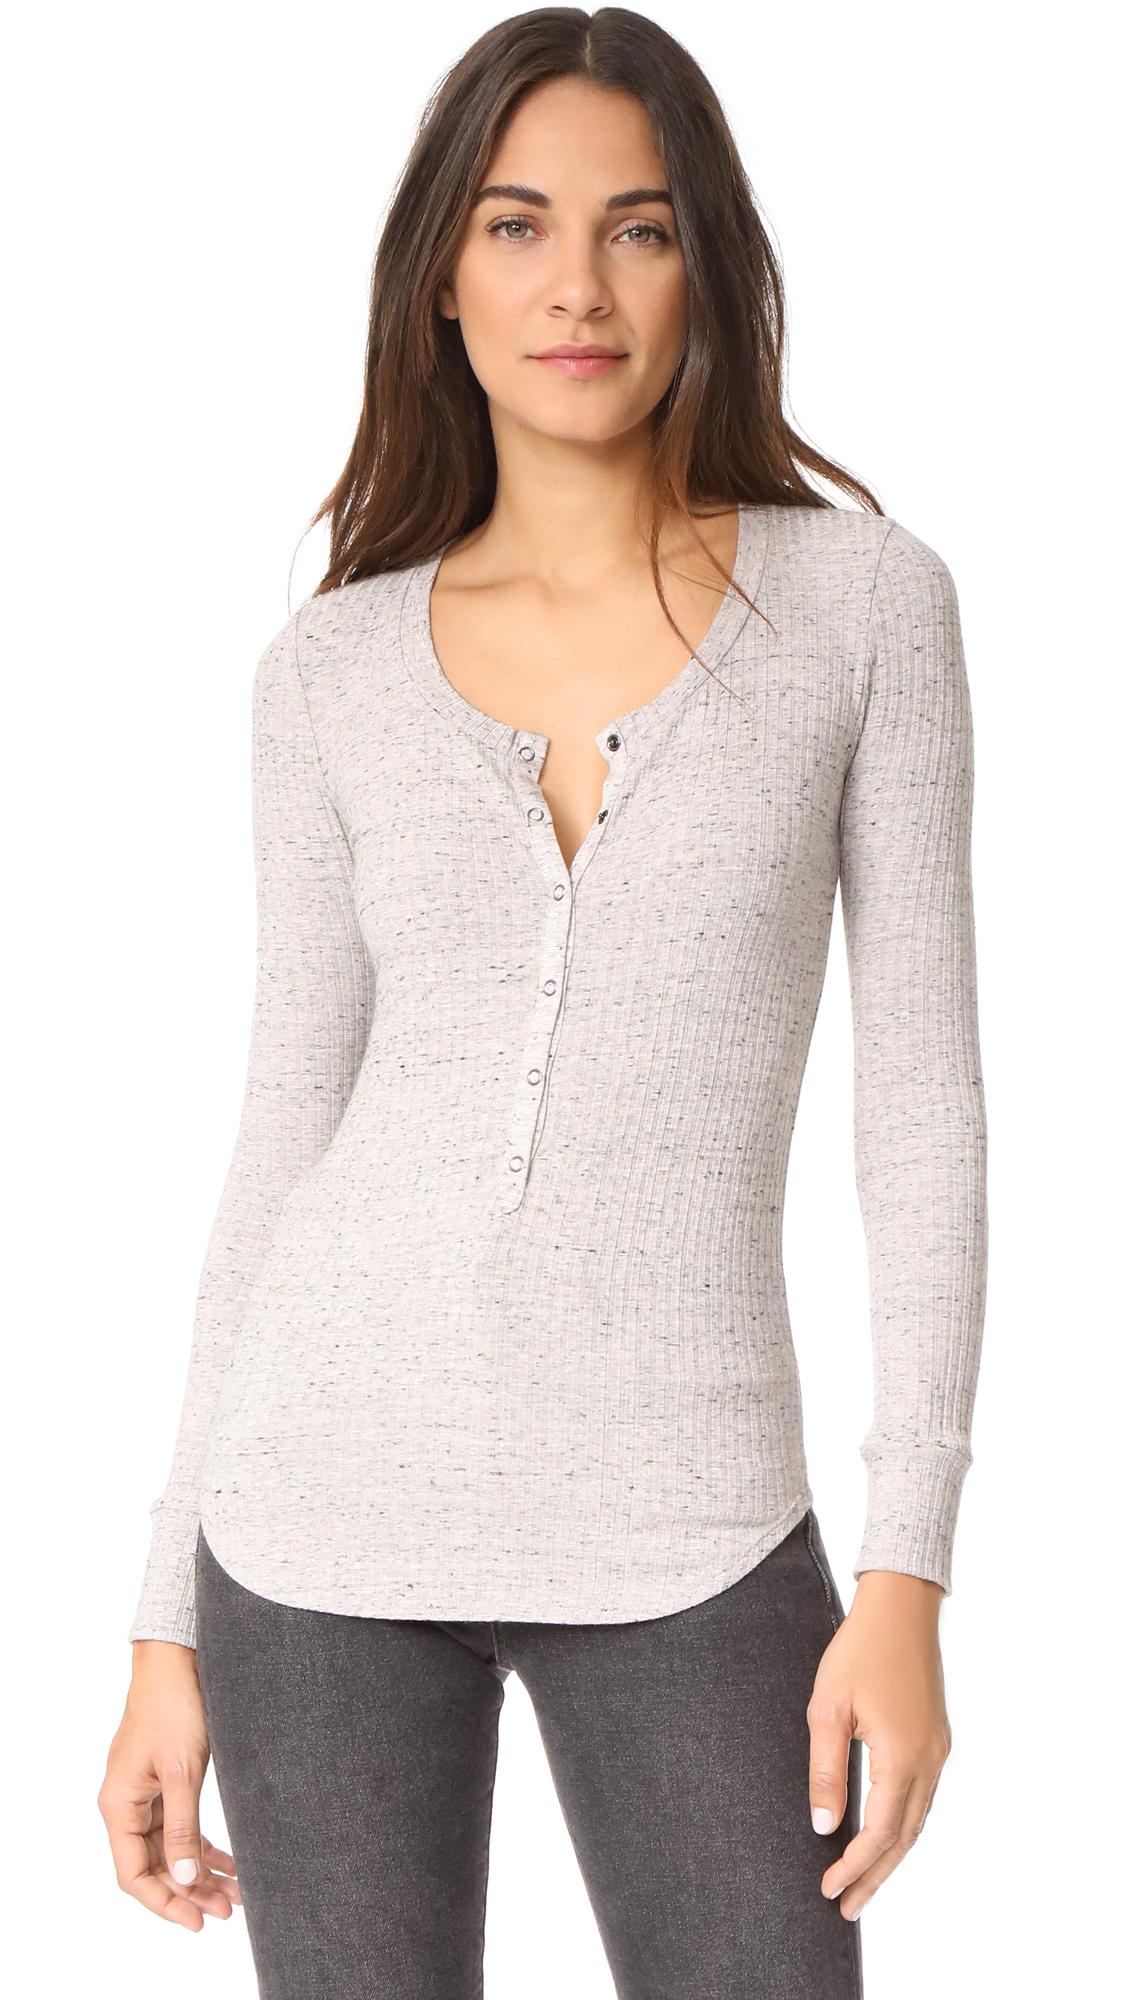 Lyst - David Lerner Snap Front Henley Top in Gray